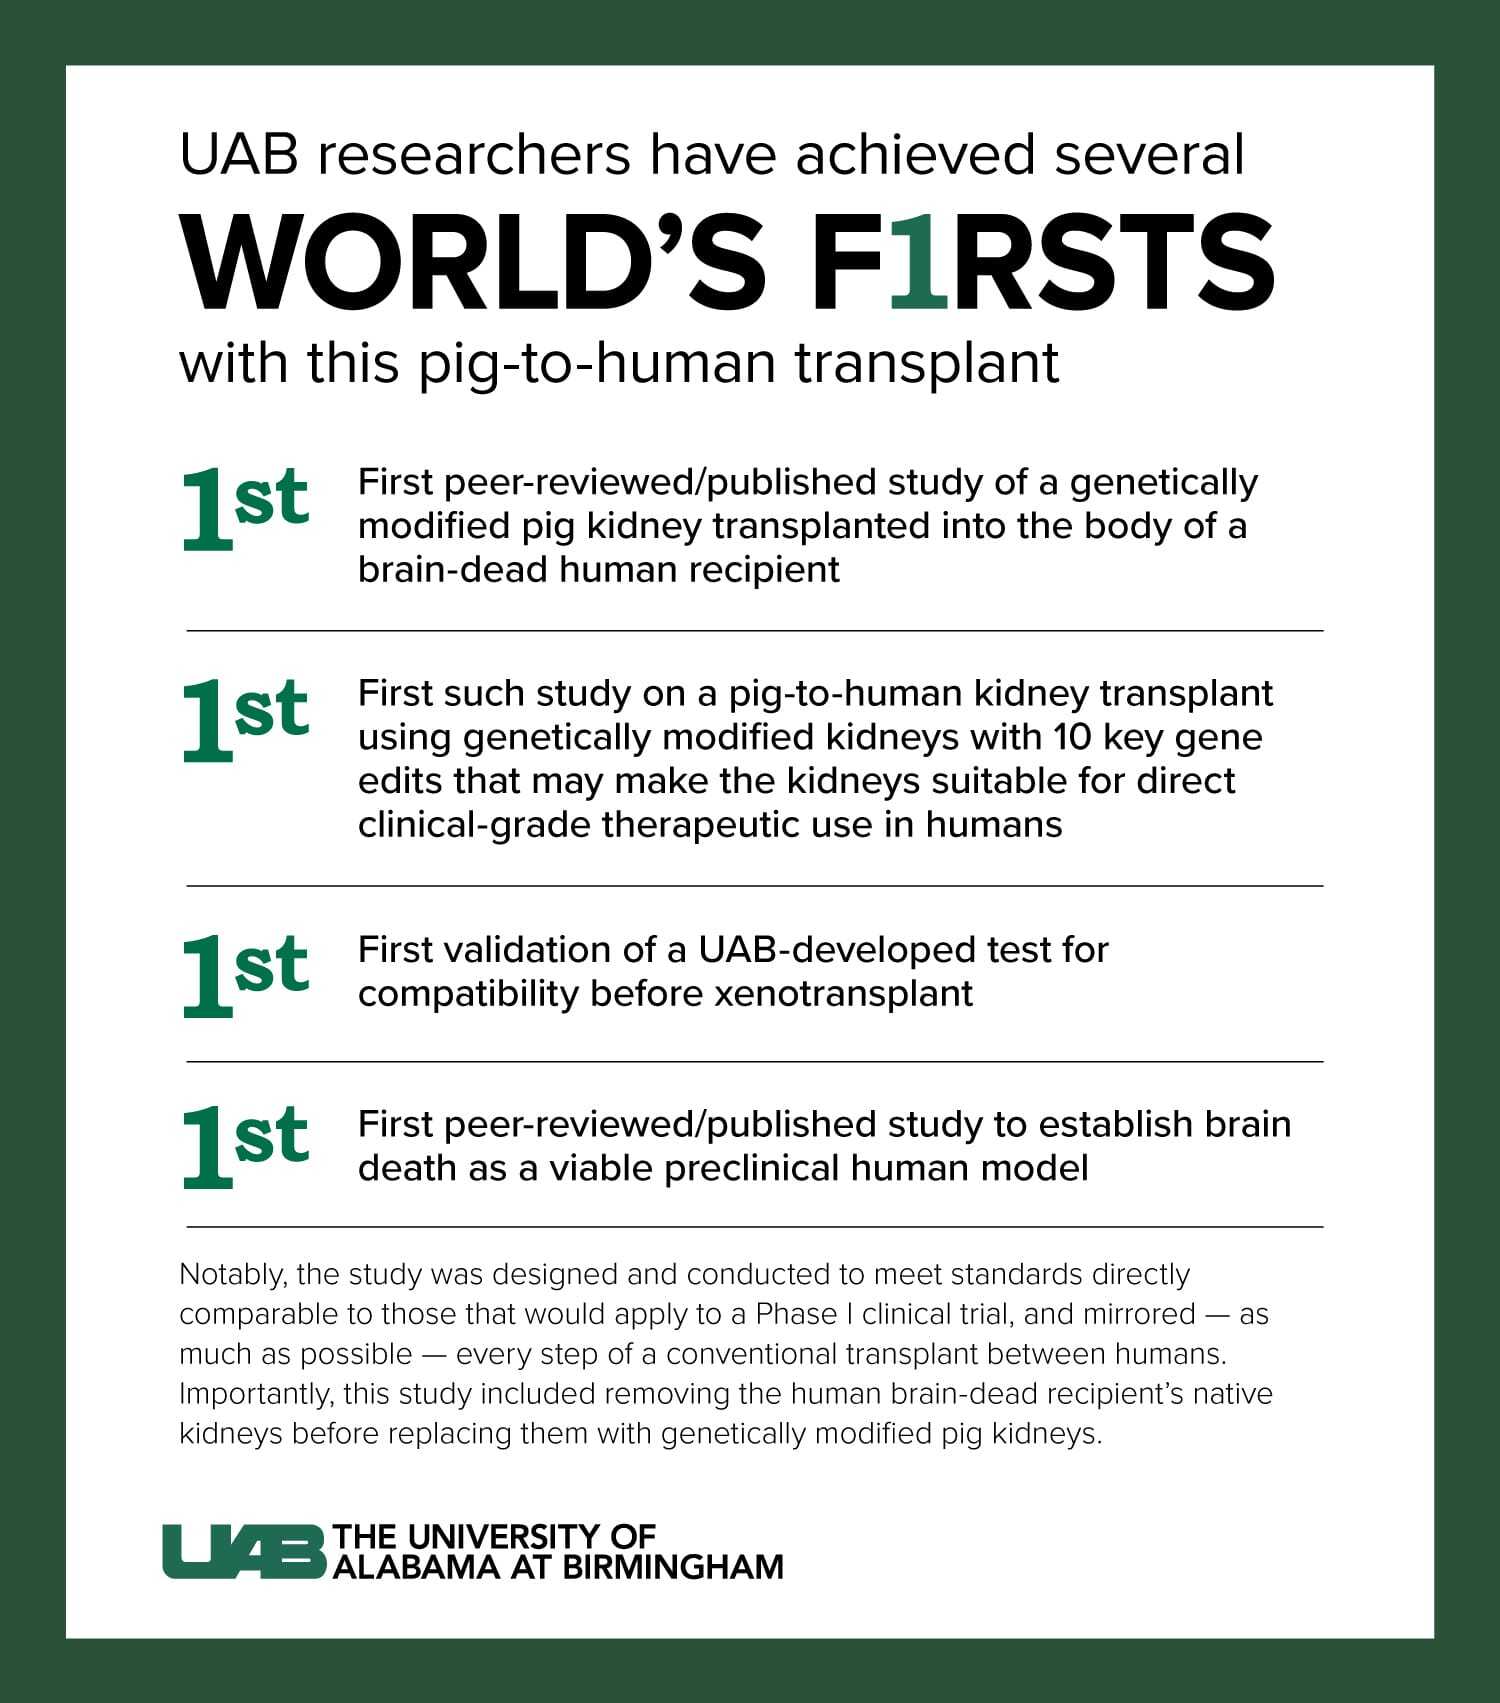 UAB researchers have achieved several world's firsts with this pig to human transplant